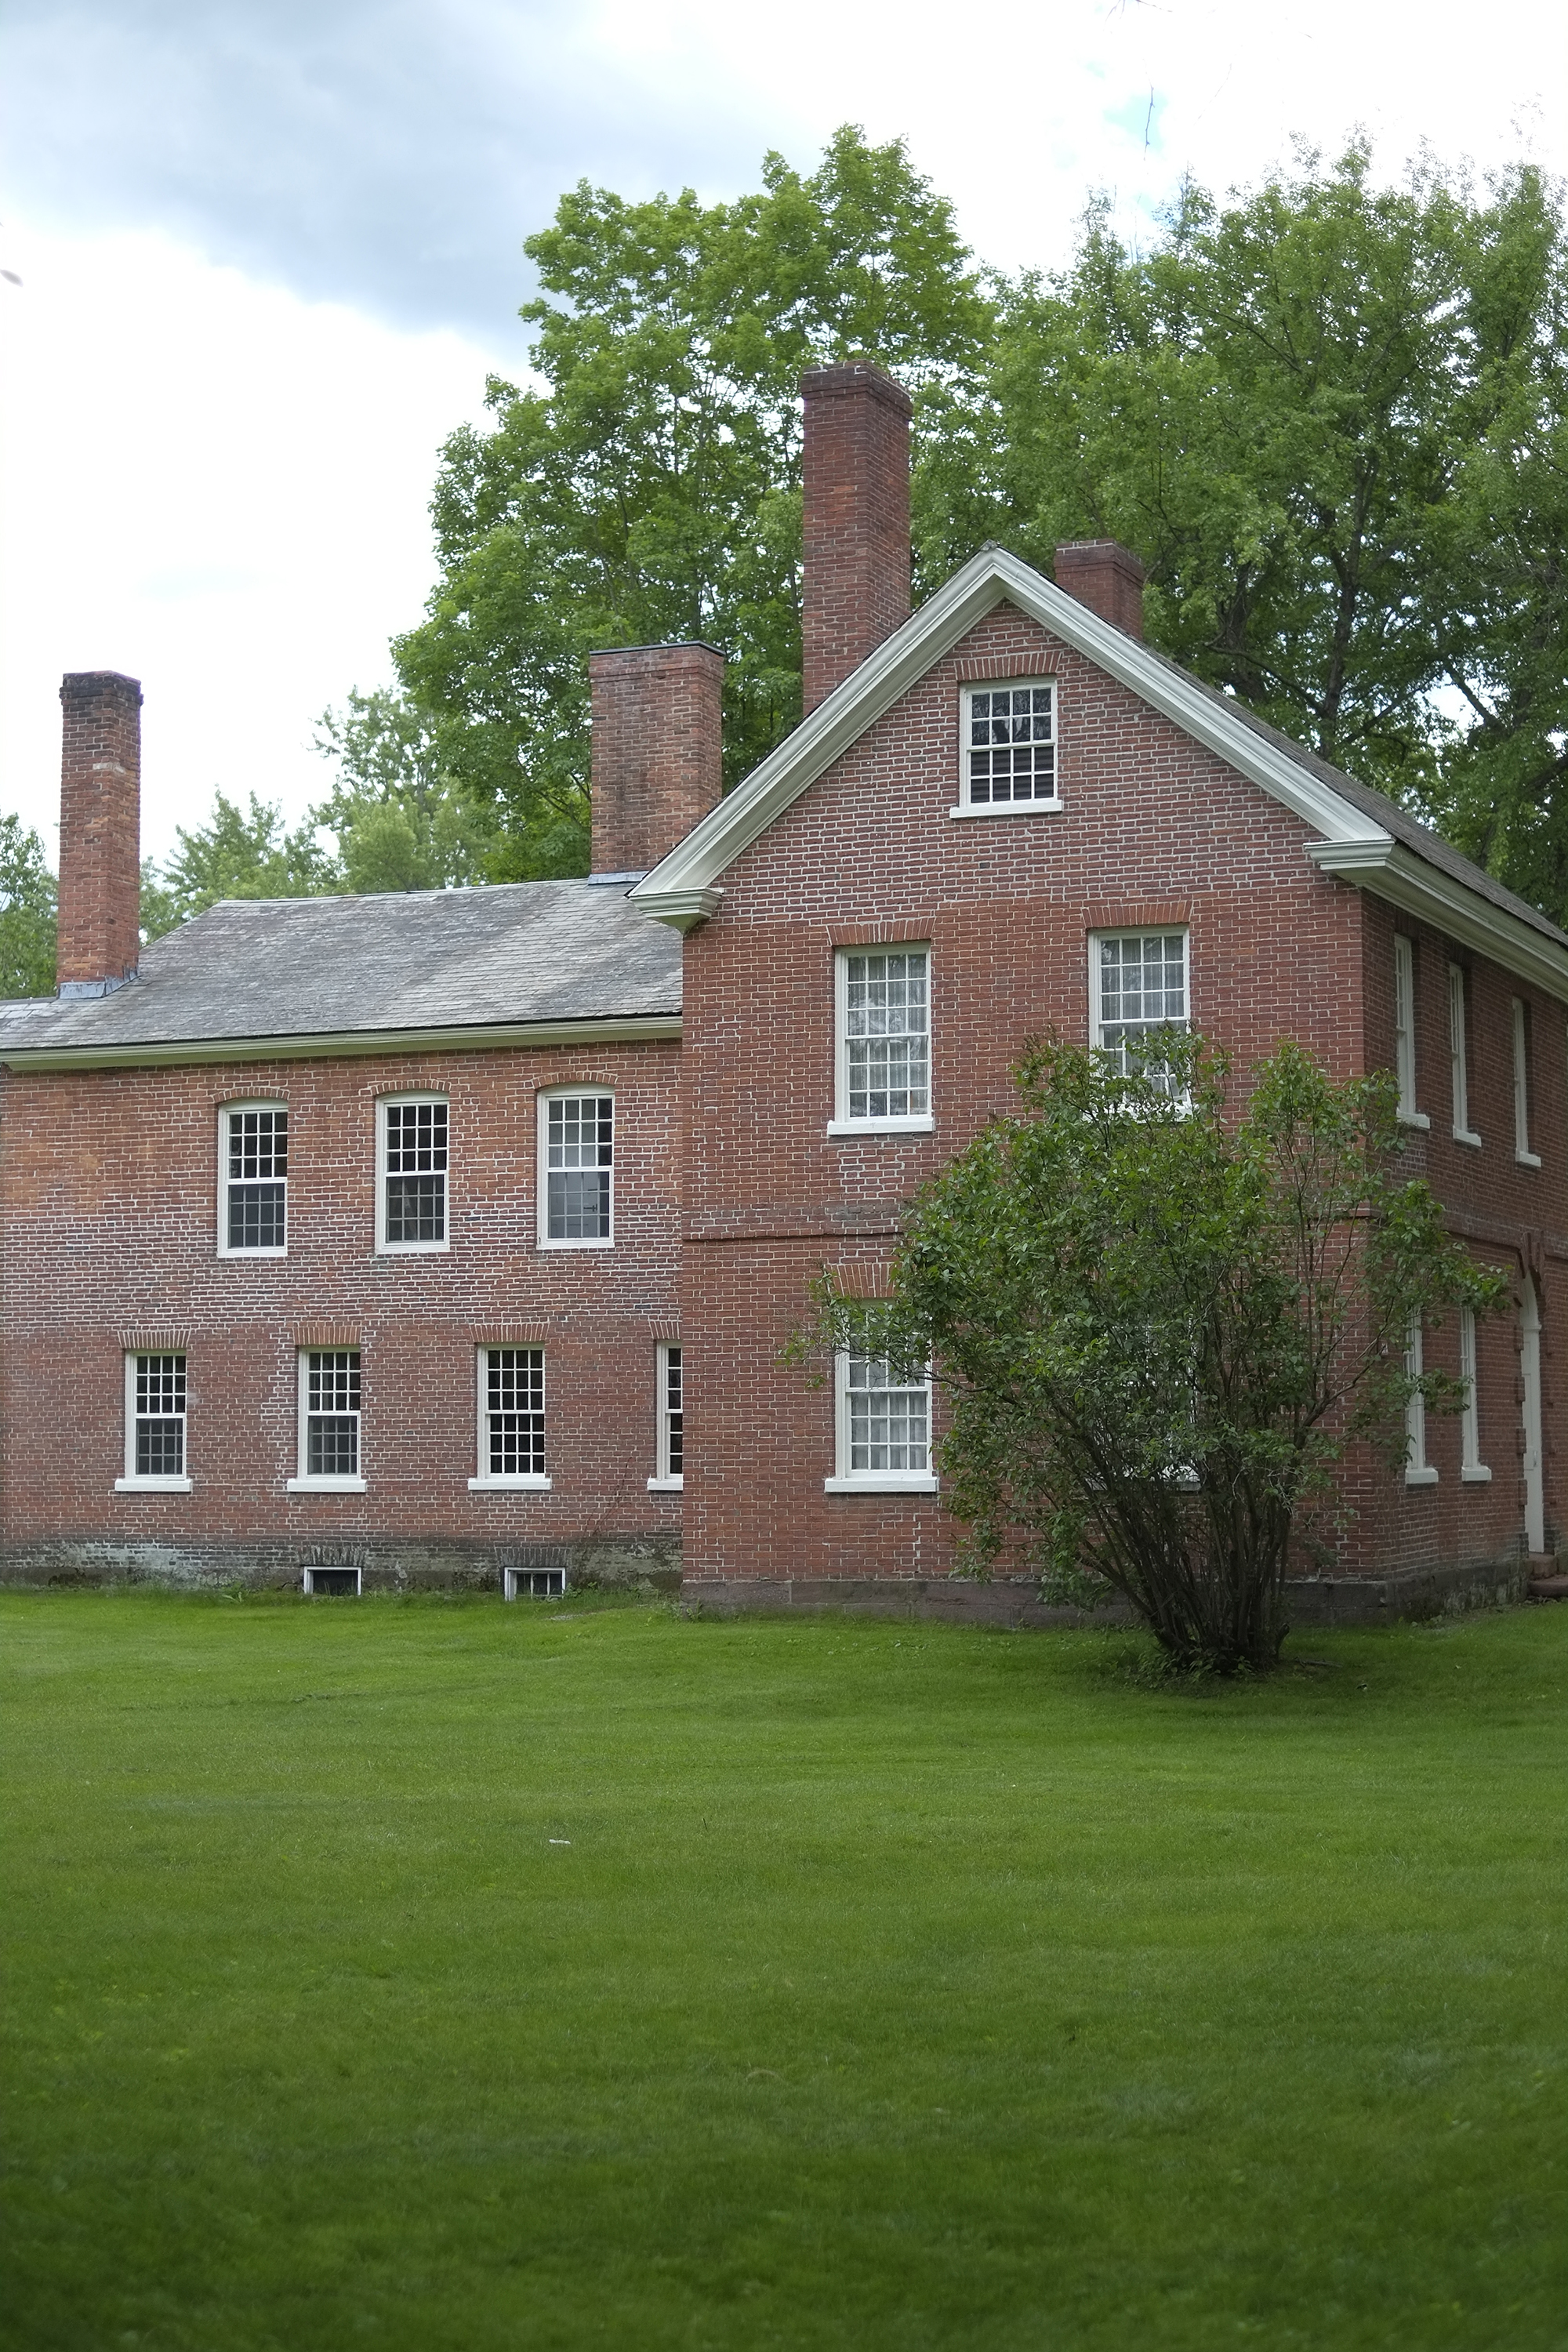 The brick exterior of Stebbins House circa 1799 offers self-guided tours showcasing Federal period furnishings.